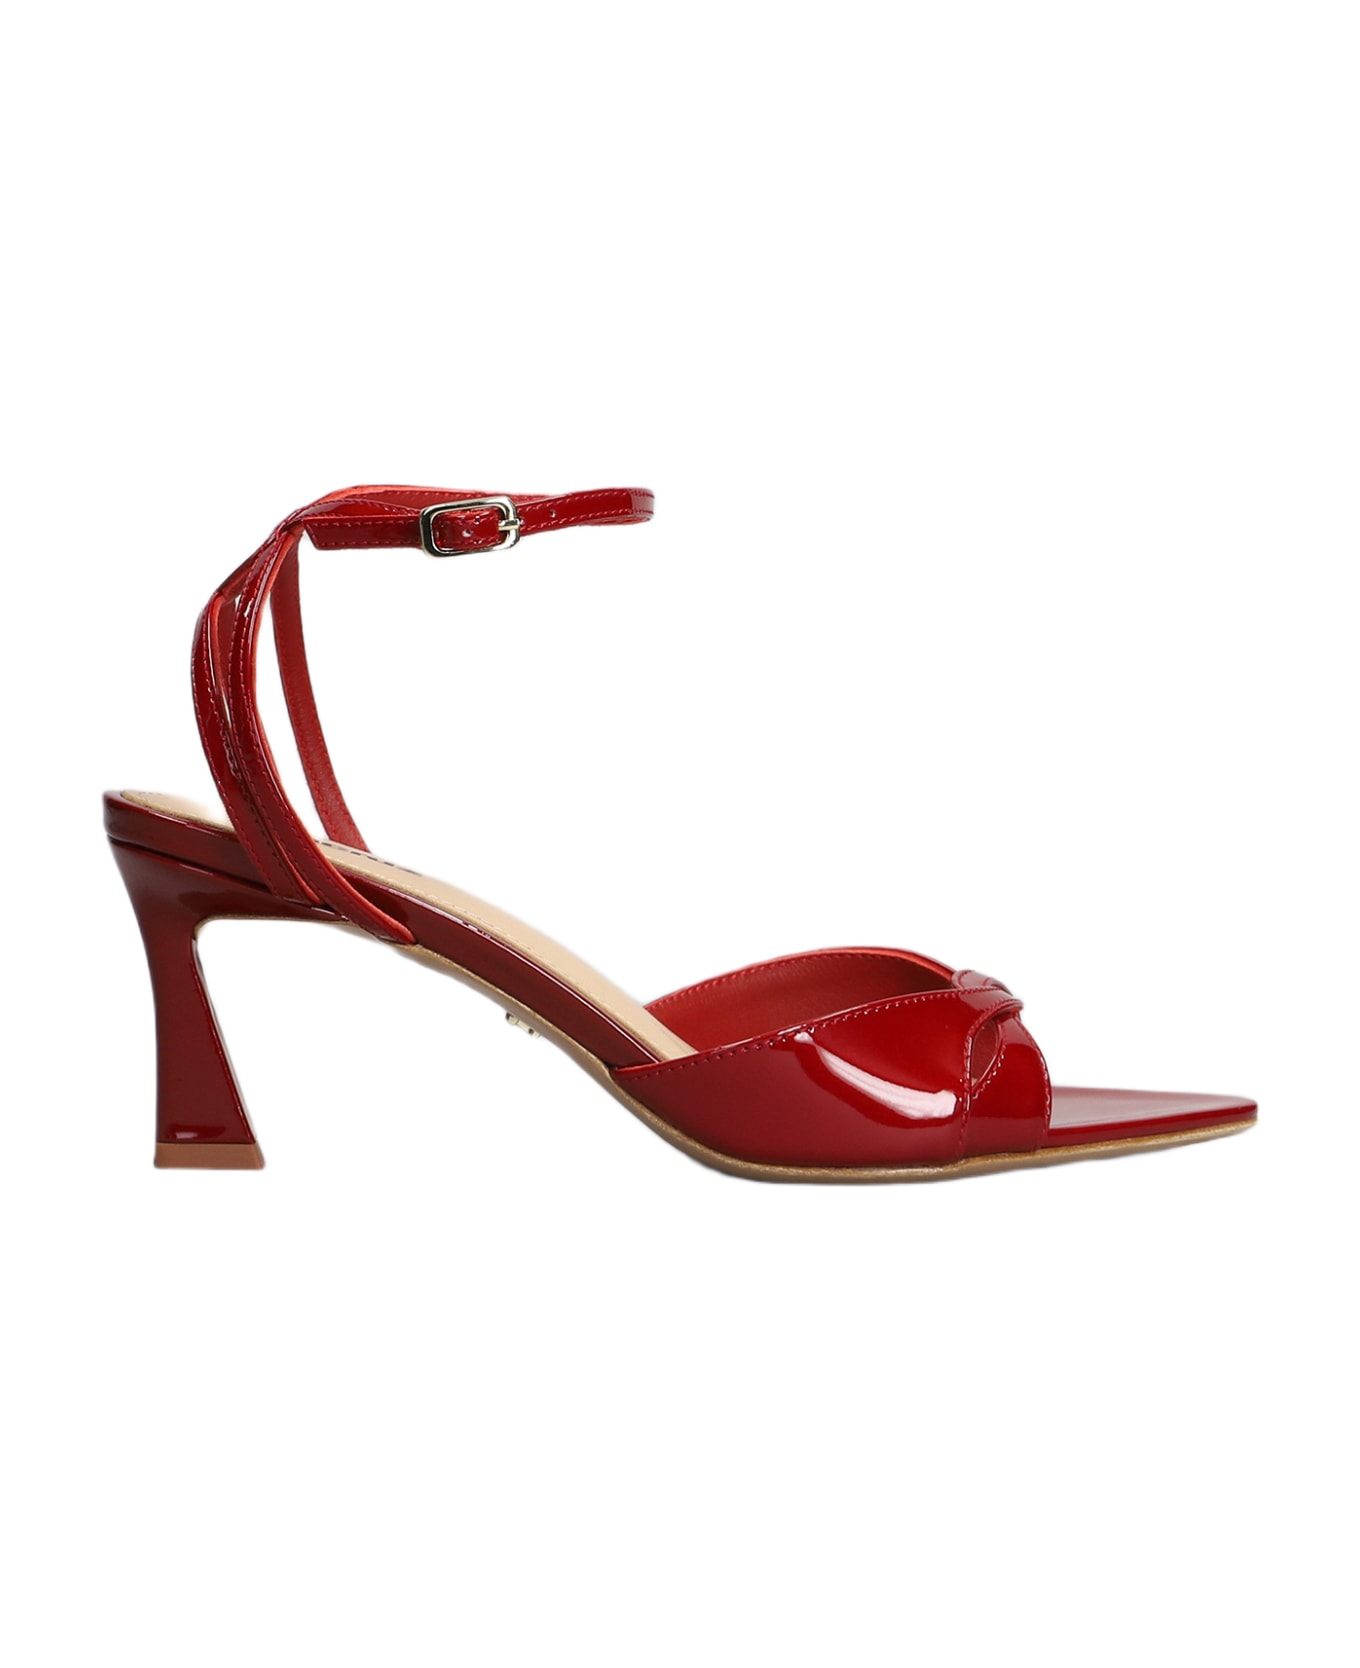 Lola Cruz Bianca 65 Sandals In Red Patent Leather - red